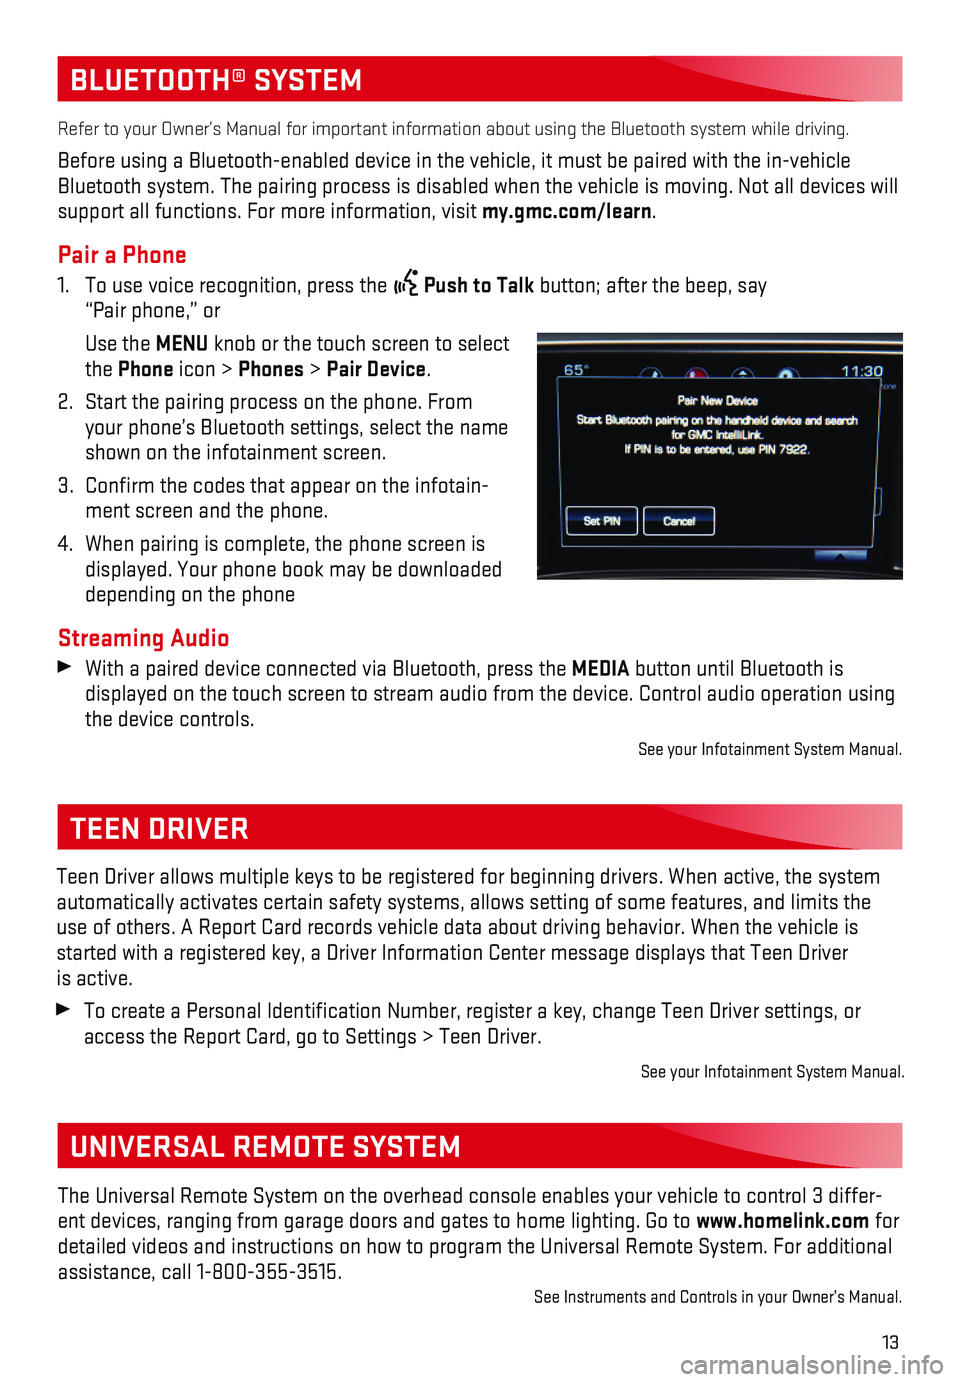 GMC SIERRA 2018  Get To Know Guide 13
BLUETOOTH® SYSTEM
Refer to your Owner’s Manual for important information about using th\
e Bluetooth system while driving. 
Before using a Bluetooth-enabled device in the vehicle, it must be pa